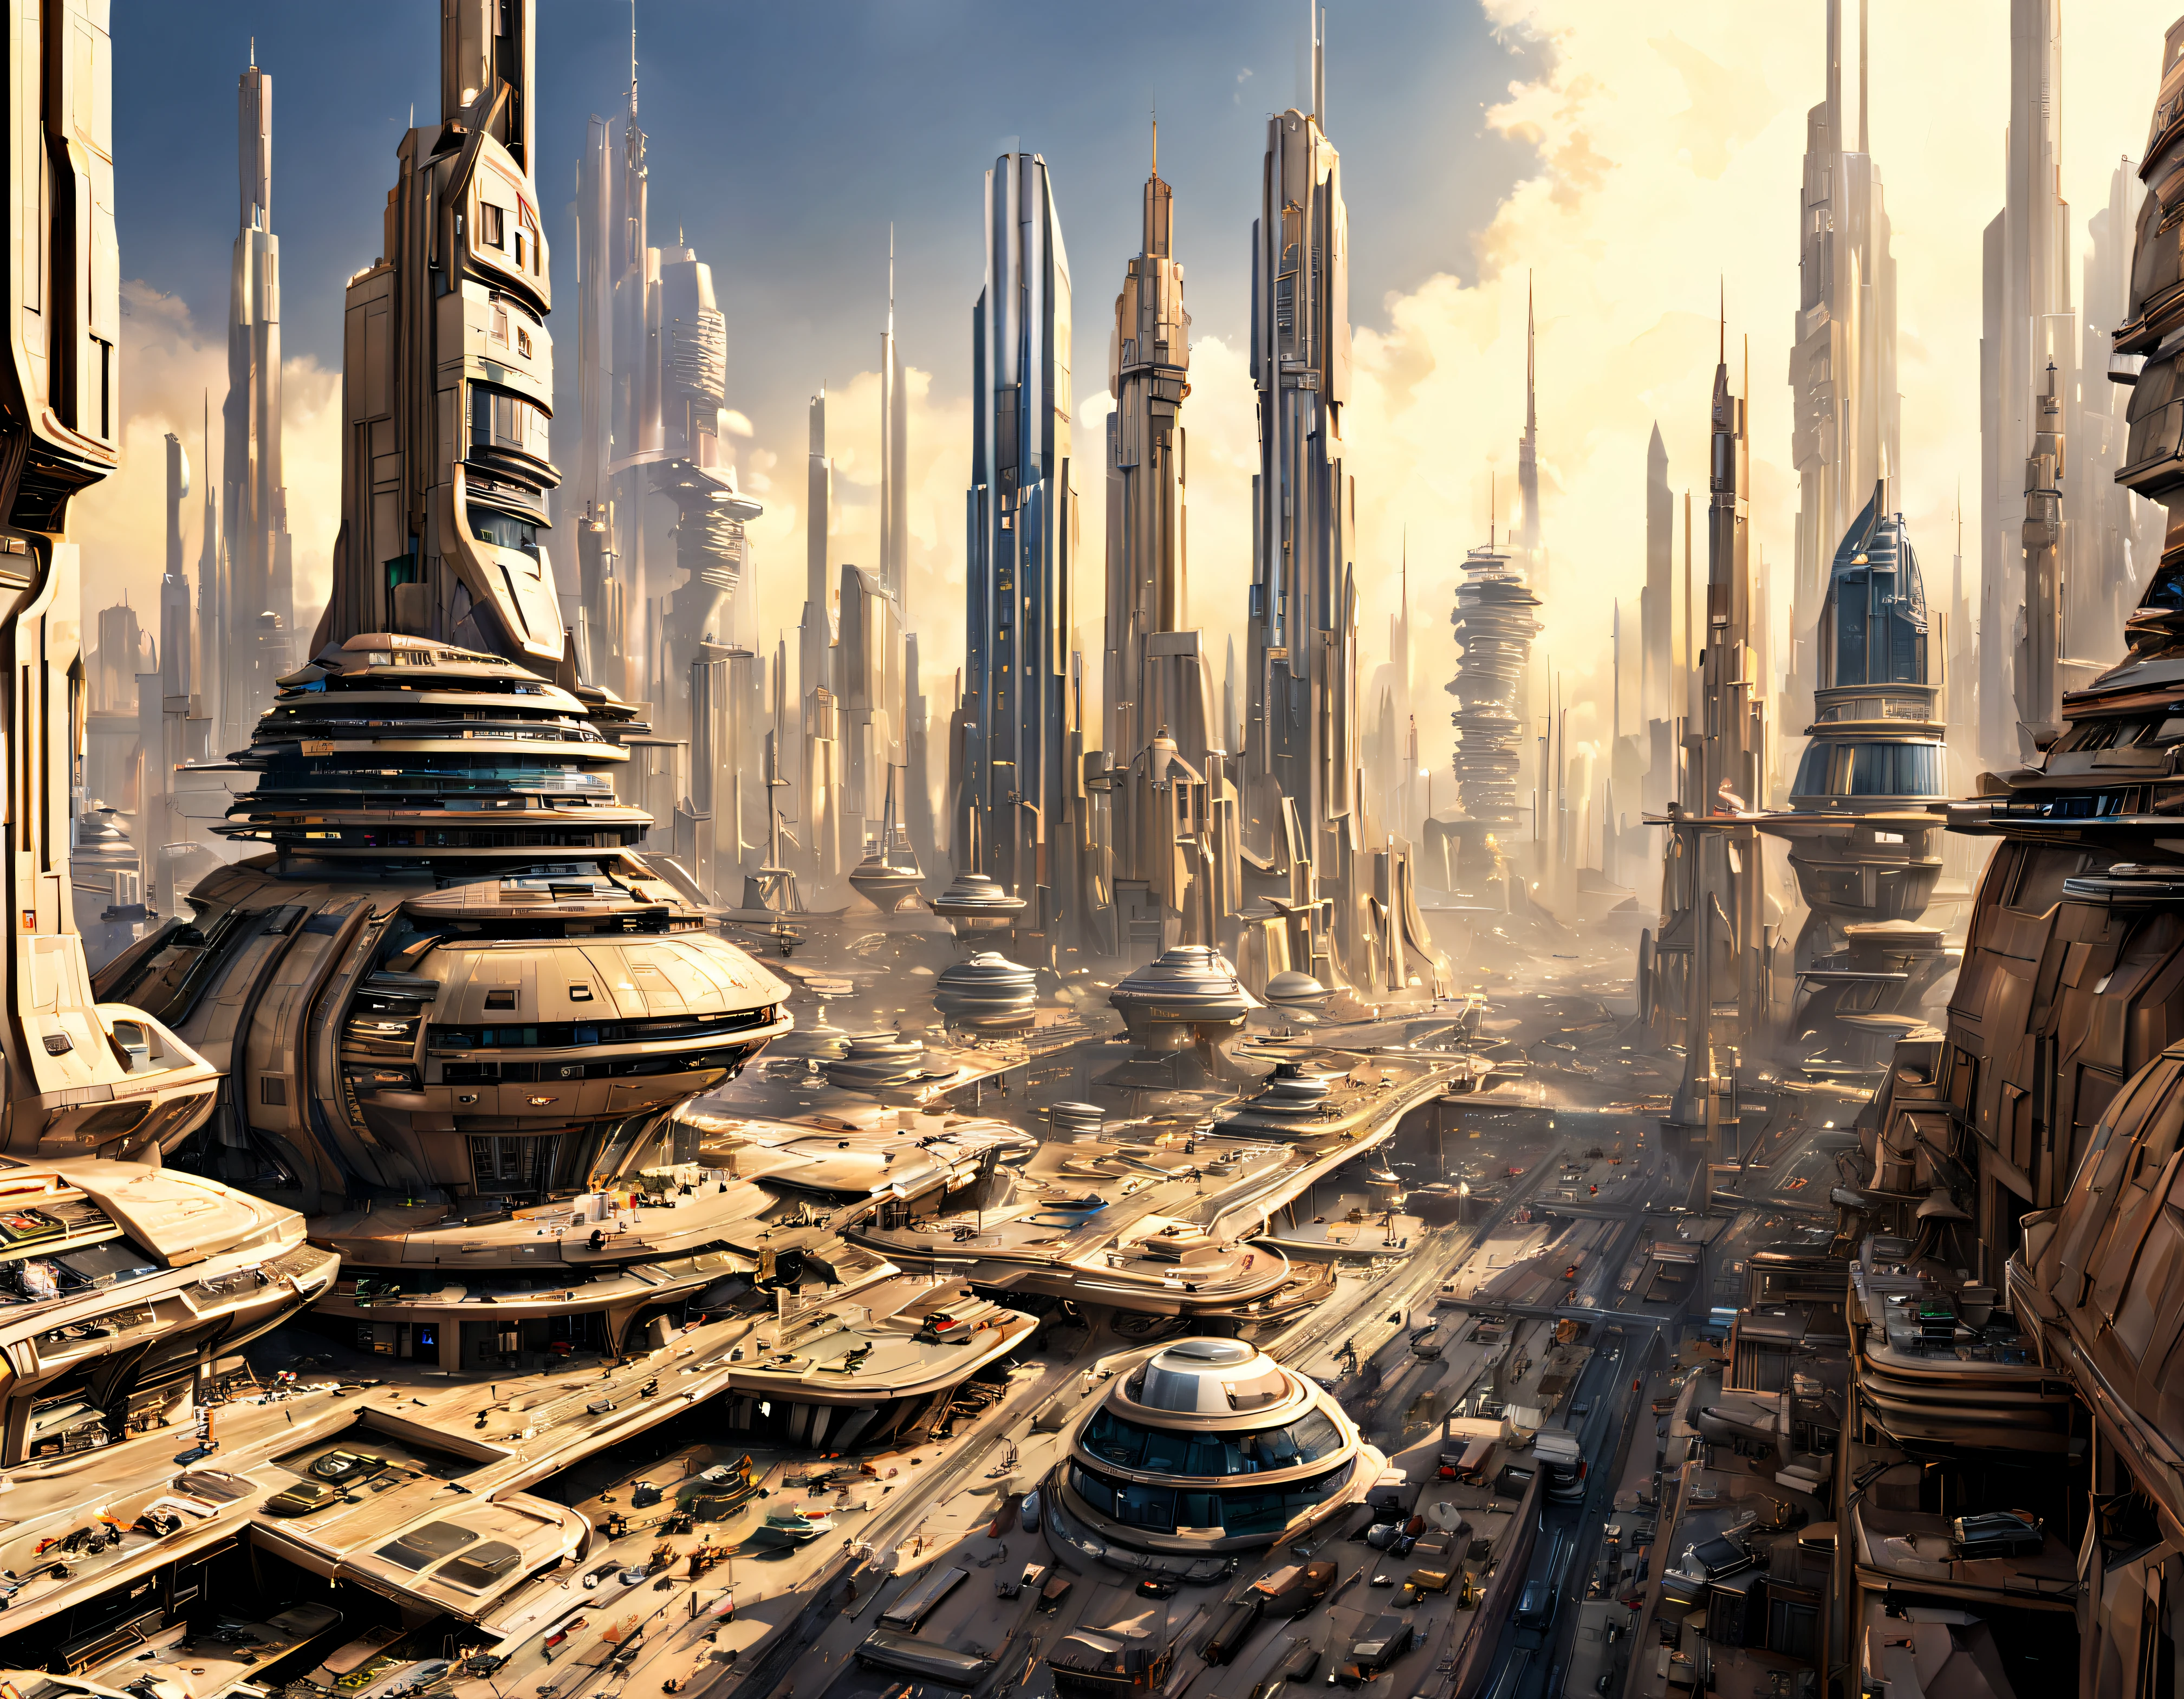 ((The city of Coruscant from Star Wars as designed by Doug Chiang)), futuristic fantasy city with immense buildings of technological design (that form an infinite avenue), non-blurred compactor buildings, with spectacular glass structures, (with bright and vibrant colors). sunny pavement (dull). people walking. well defined image with many buildings together. sharp well defined 8k image. the buildings reach high into the background.,8k. cinematographic image.